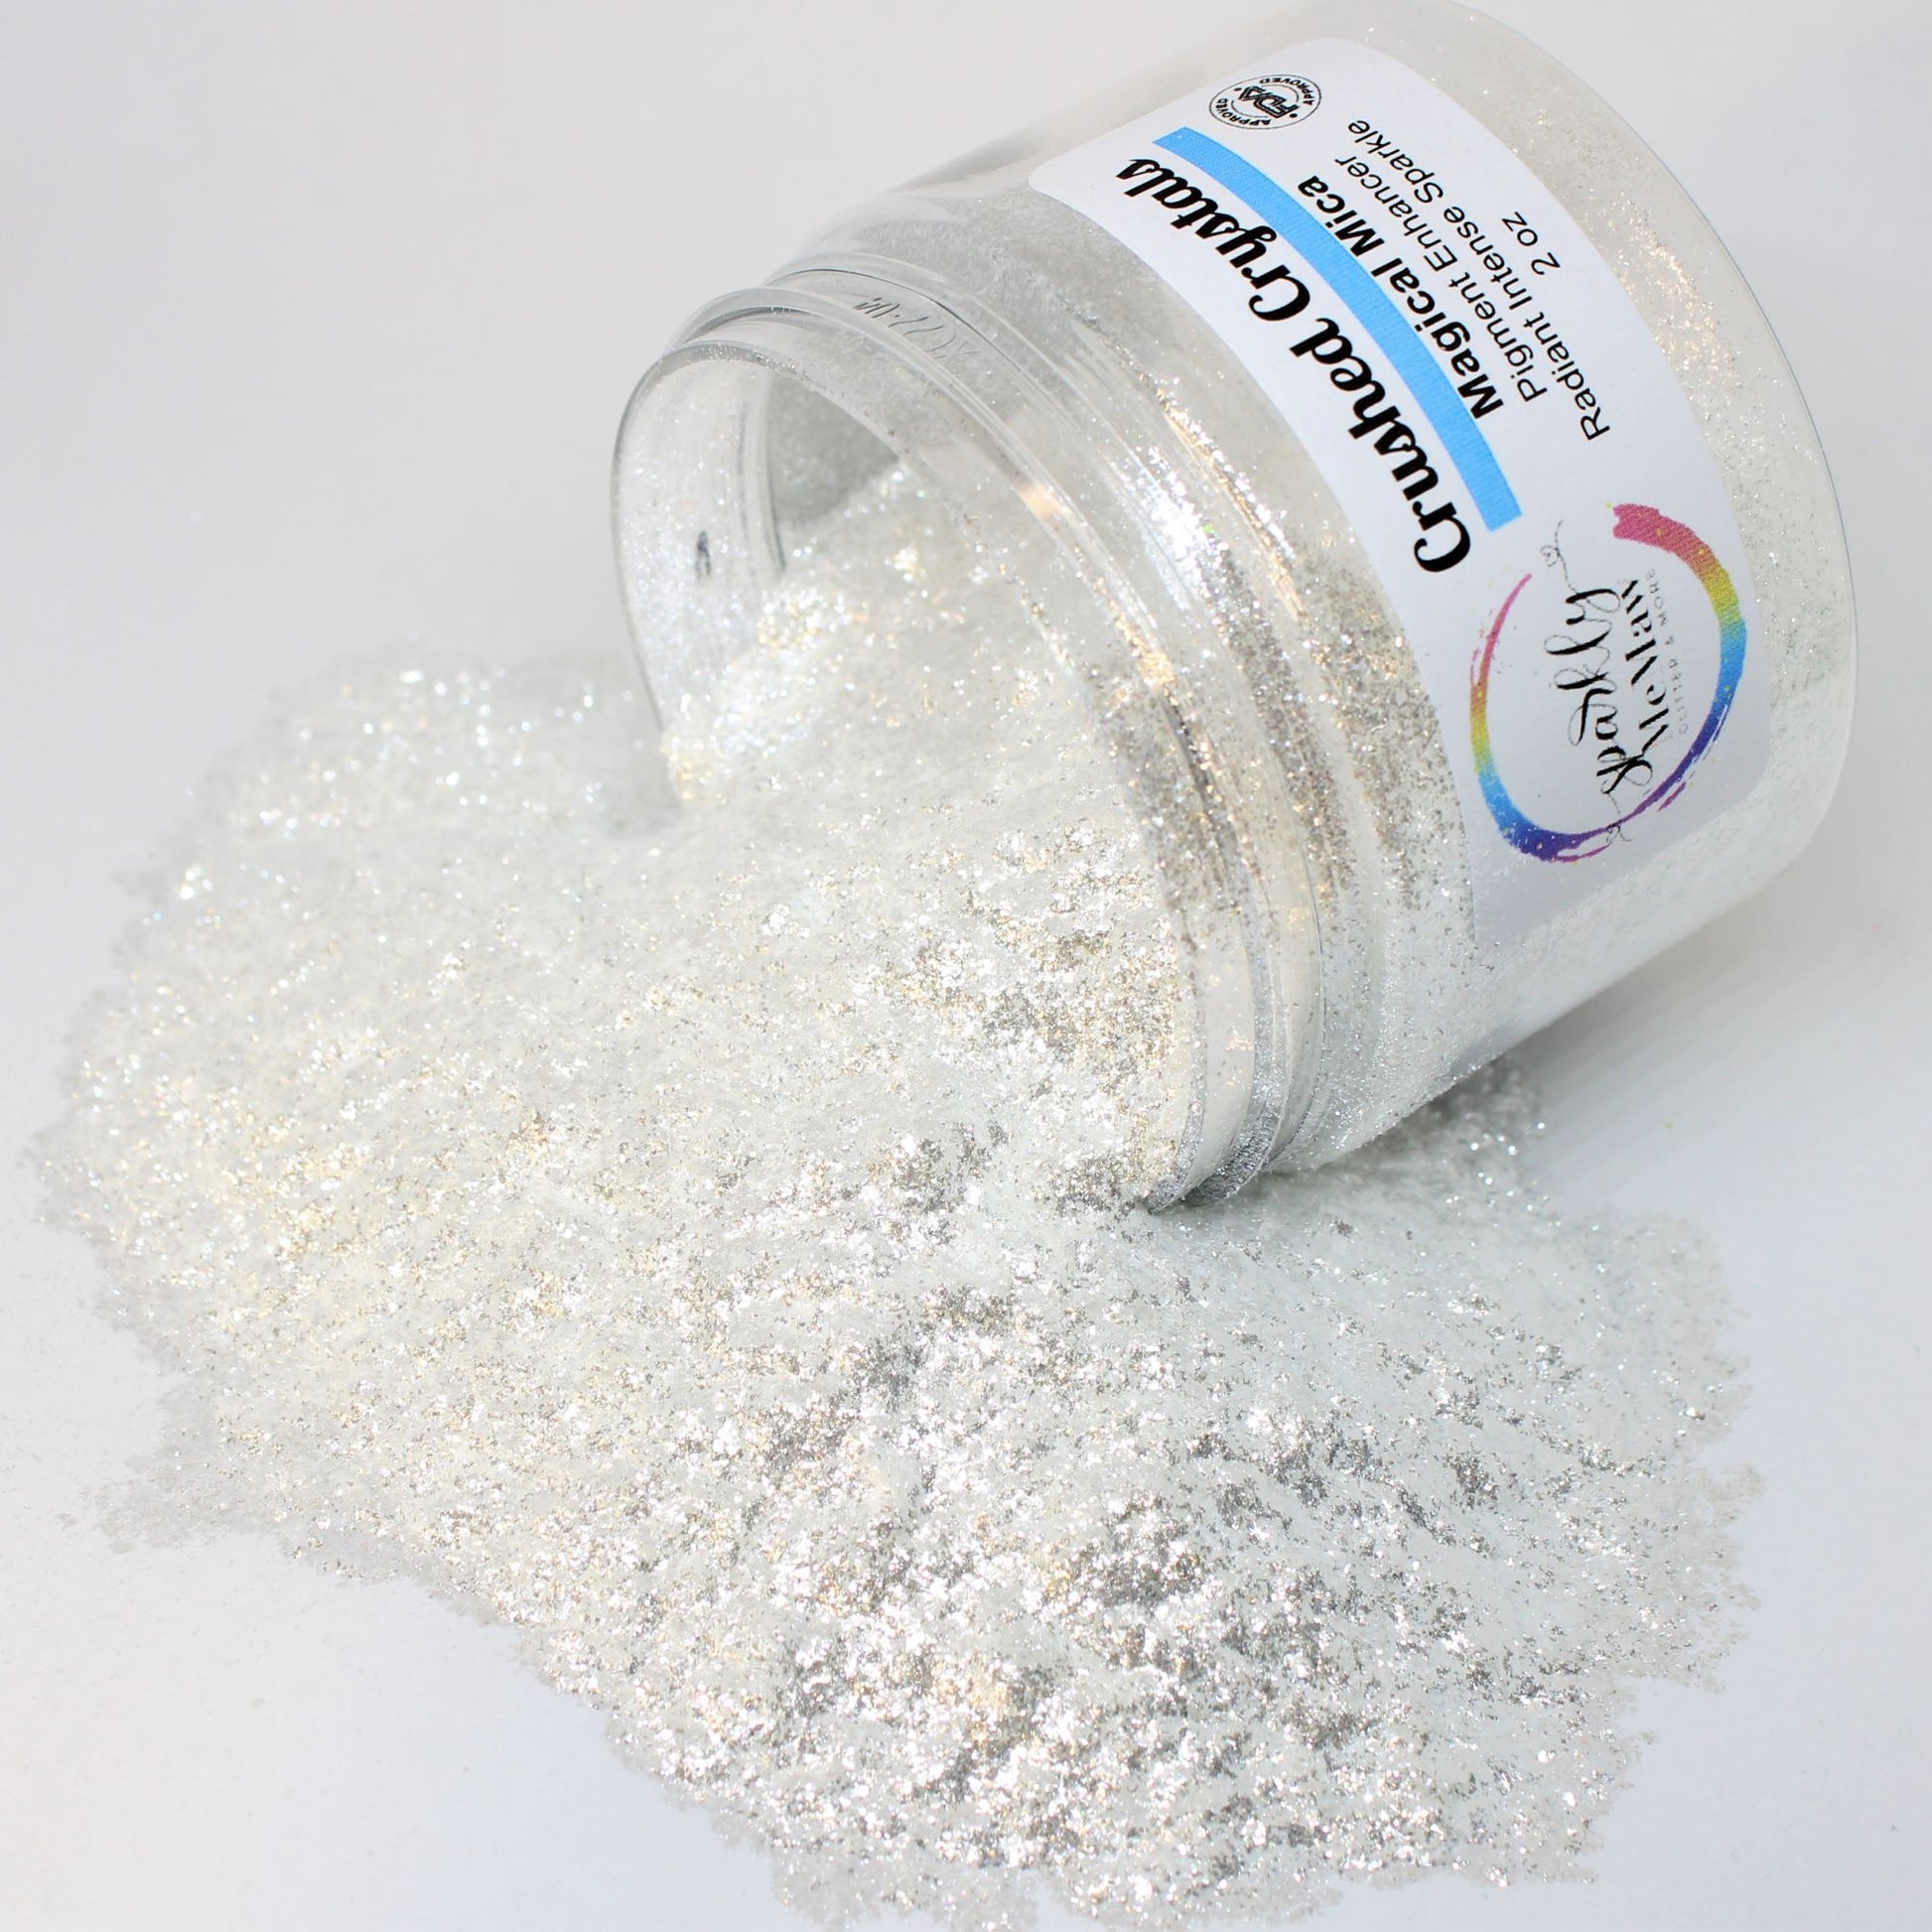  Crushed Crystal Mica Powder Pigment (56g) Multipurpose DIY Arts  and Crafts, Cosmetic Grade, Soap,Resin Epoxy,Paint, Slime, Mold Making,  Candle Making, Nail Art (Ultra Fine Glitter, 2oz) Powder Pigment : Arts,  Crafts